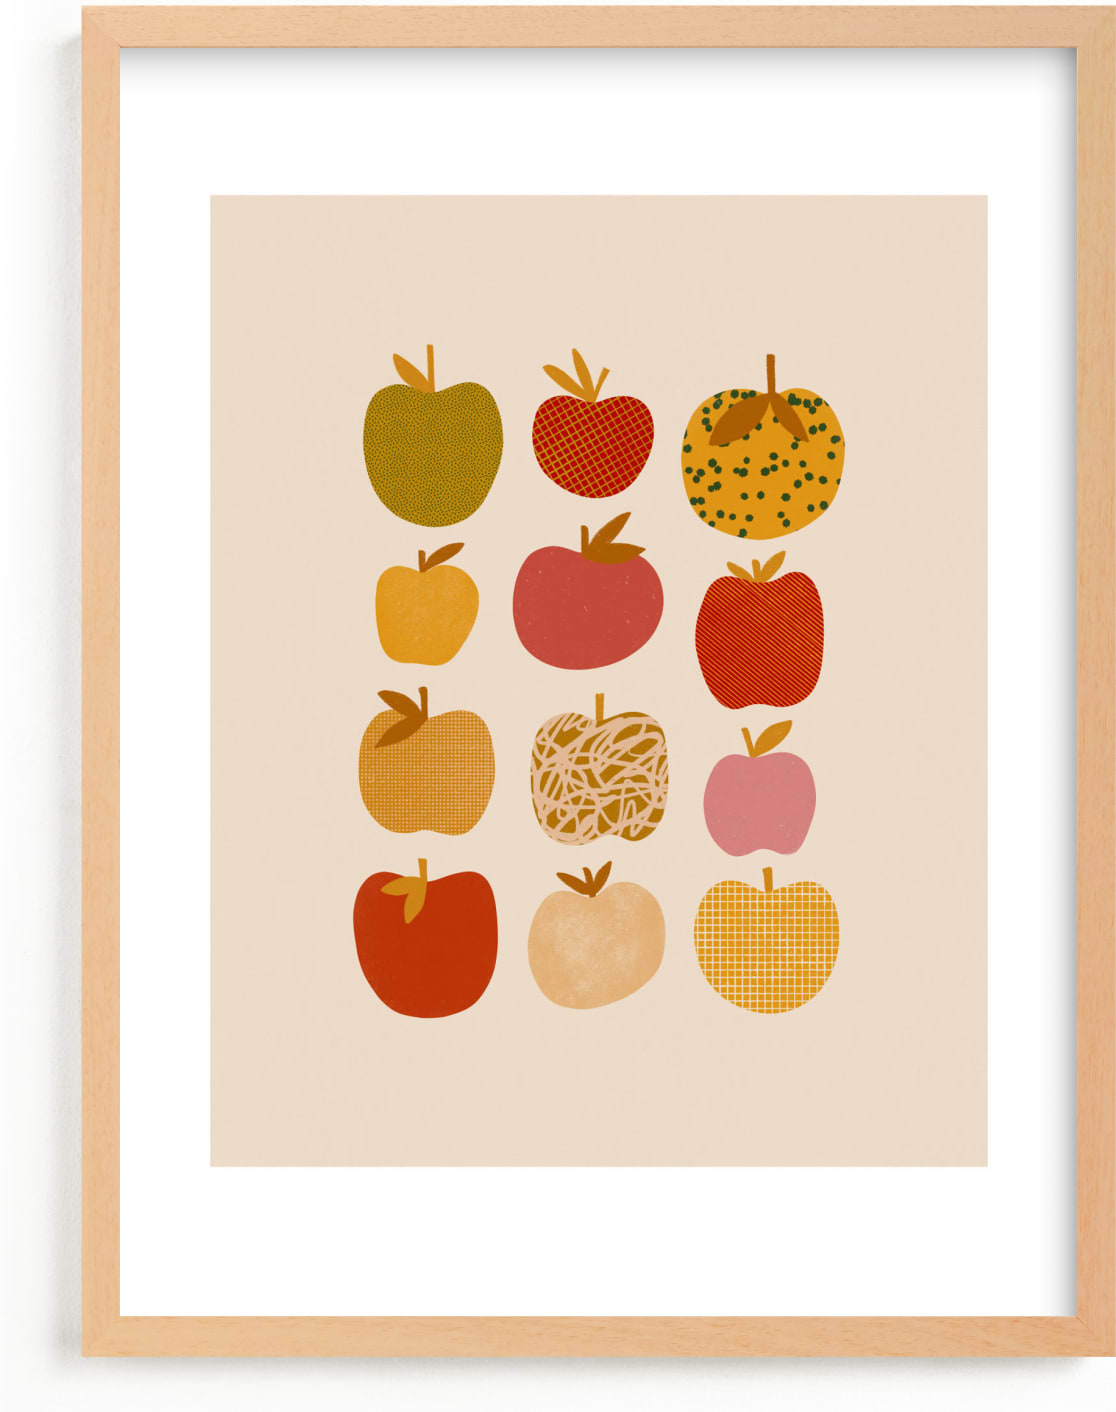 This is a colorful kids wall art by Alisa Galitsyna called Apples.